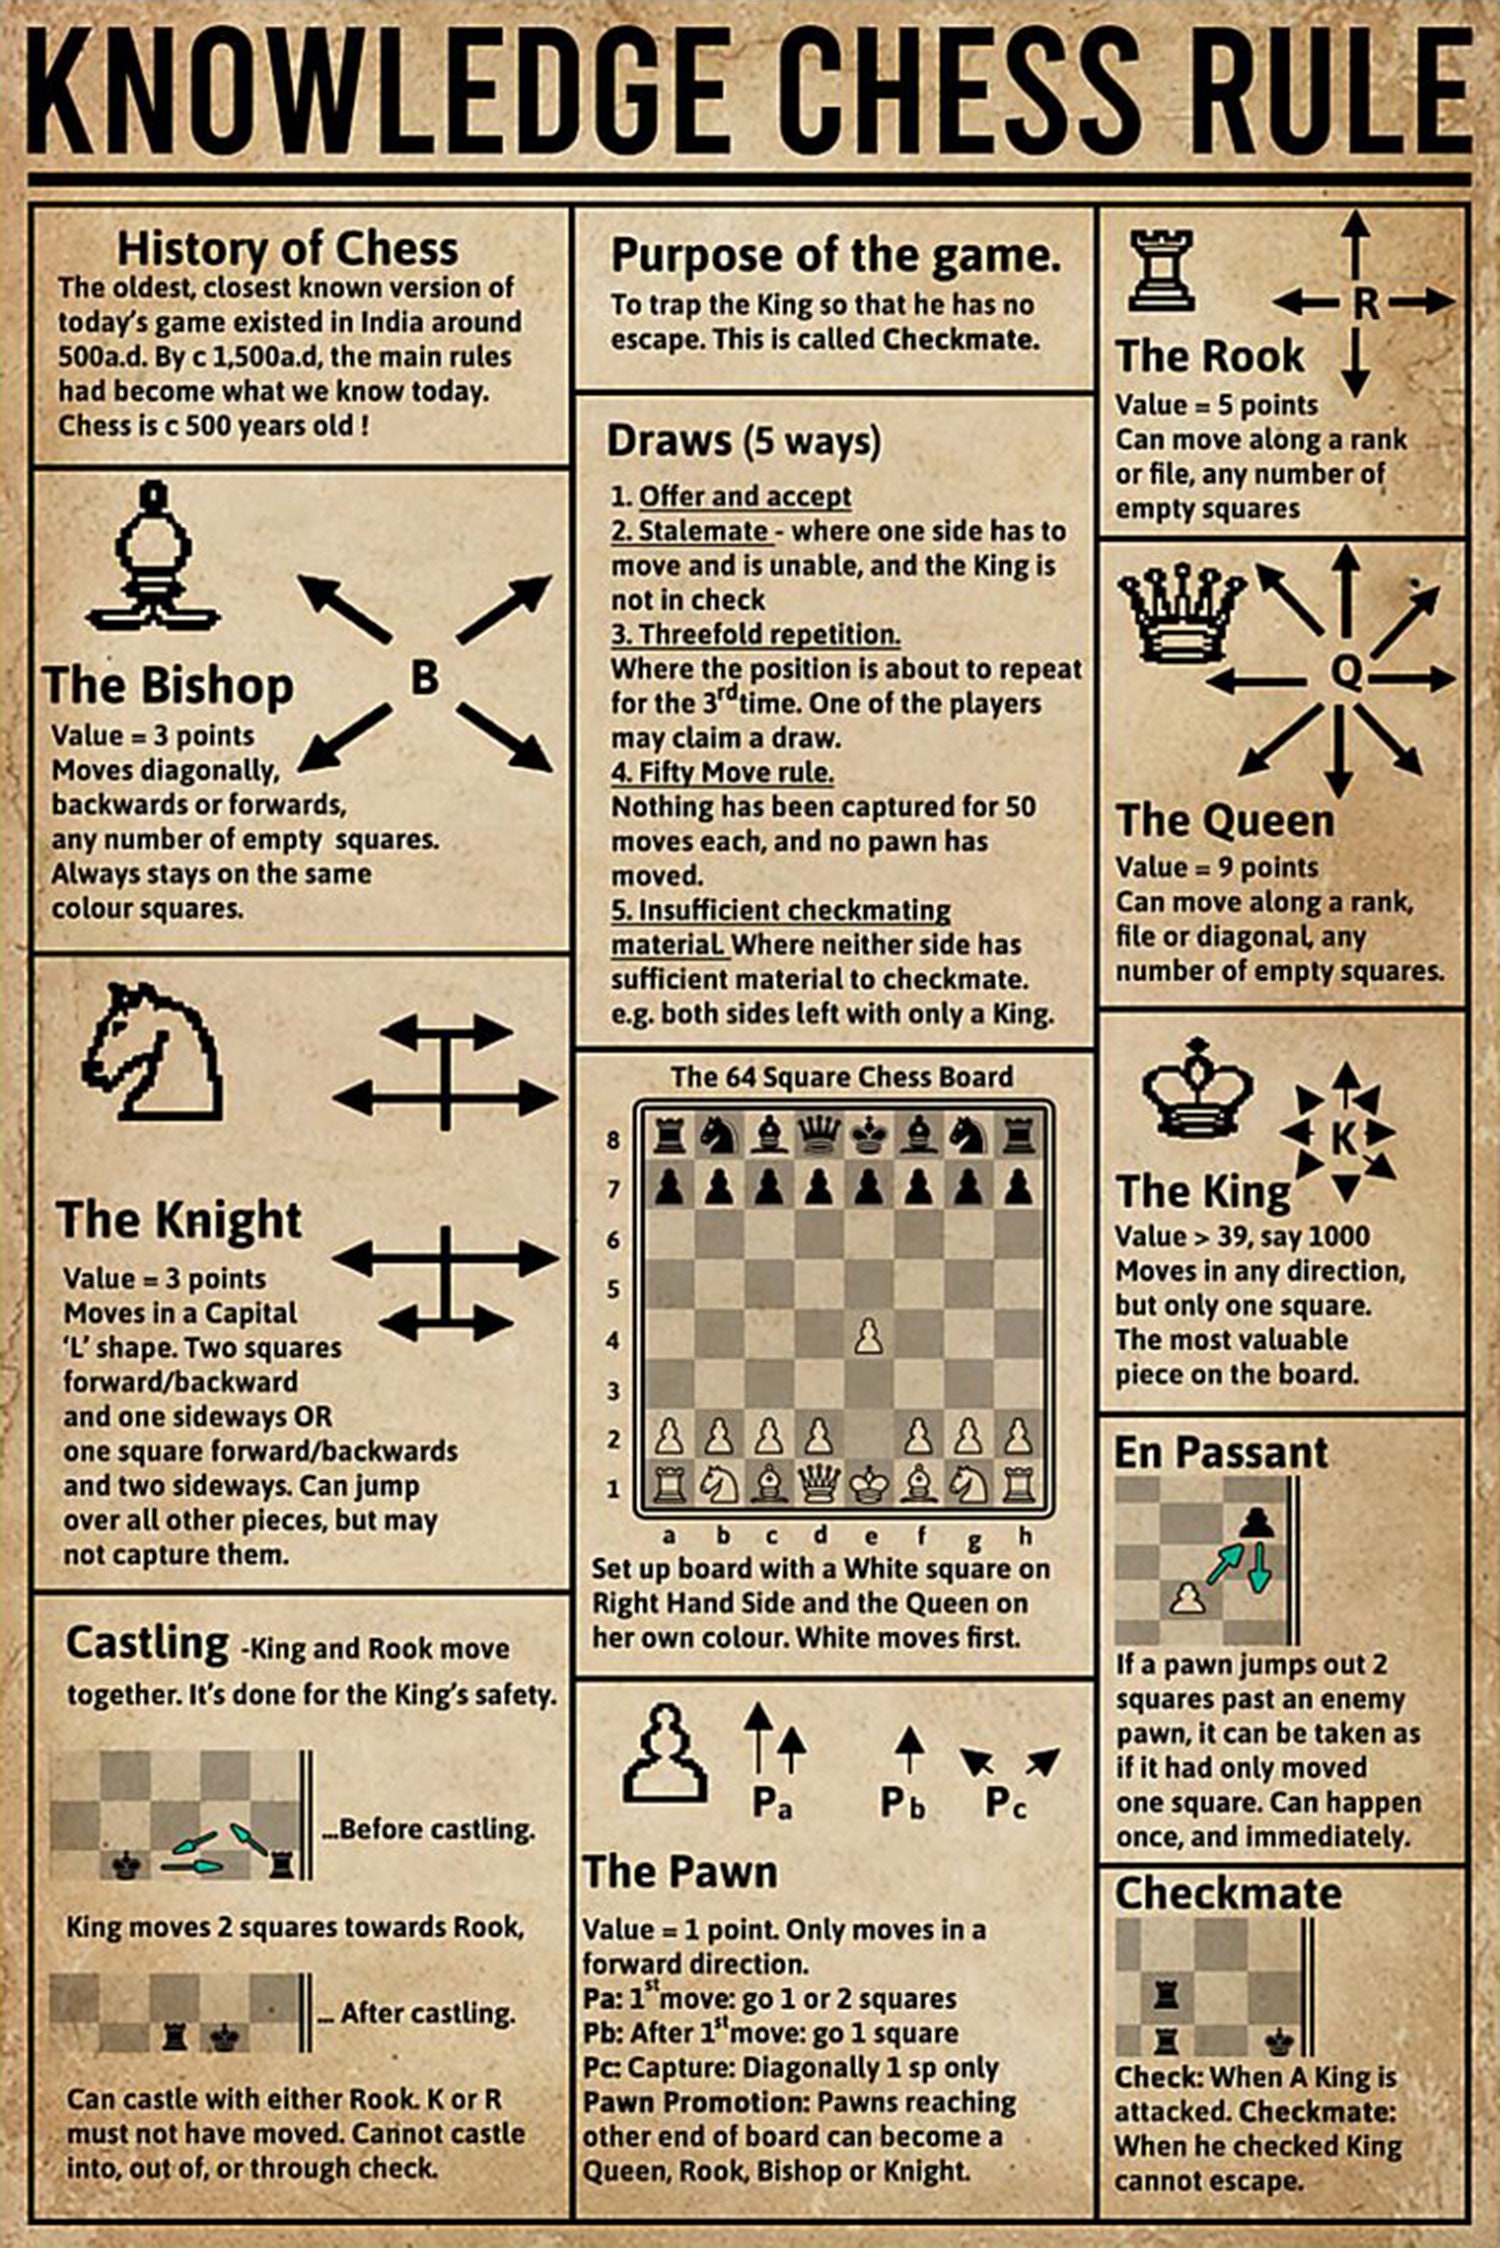 r/196 - chess 2 rule  Chess, Funny pictures, Fun facts